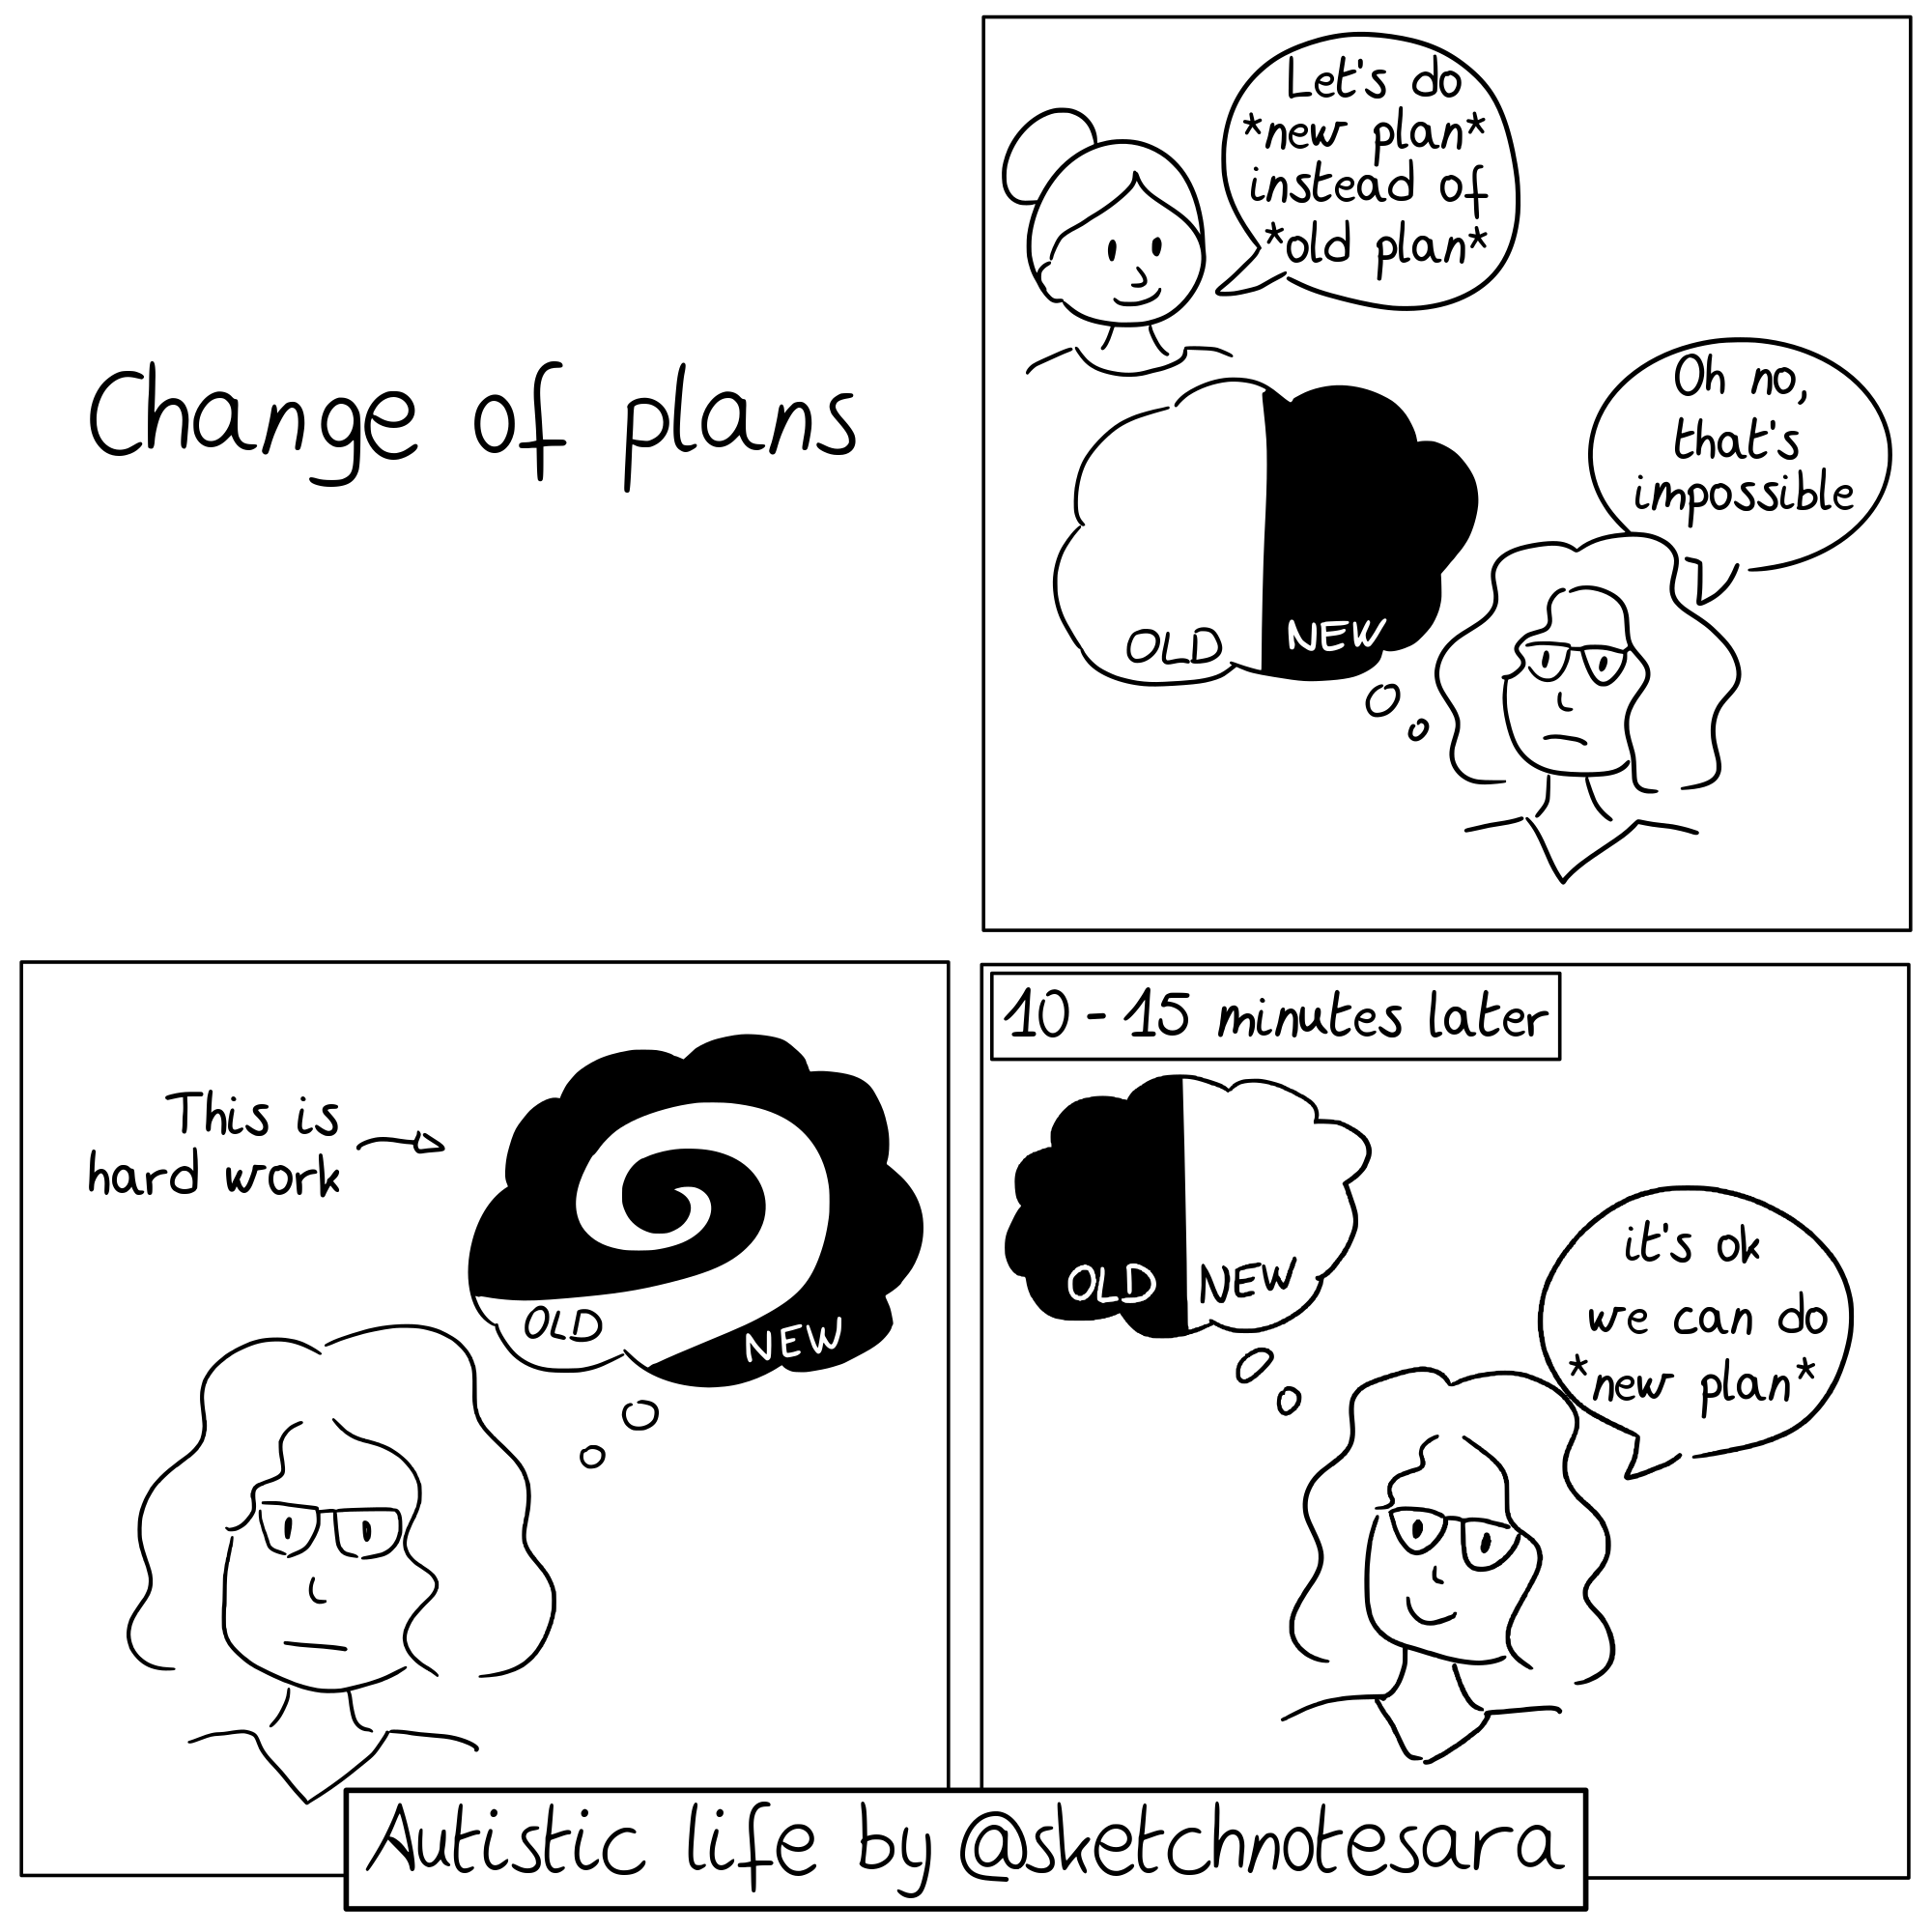 Sketchnote of Comics about routines and plans as an autistic